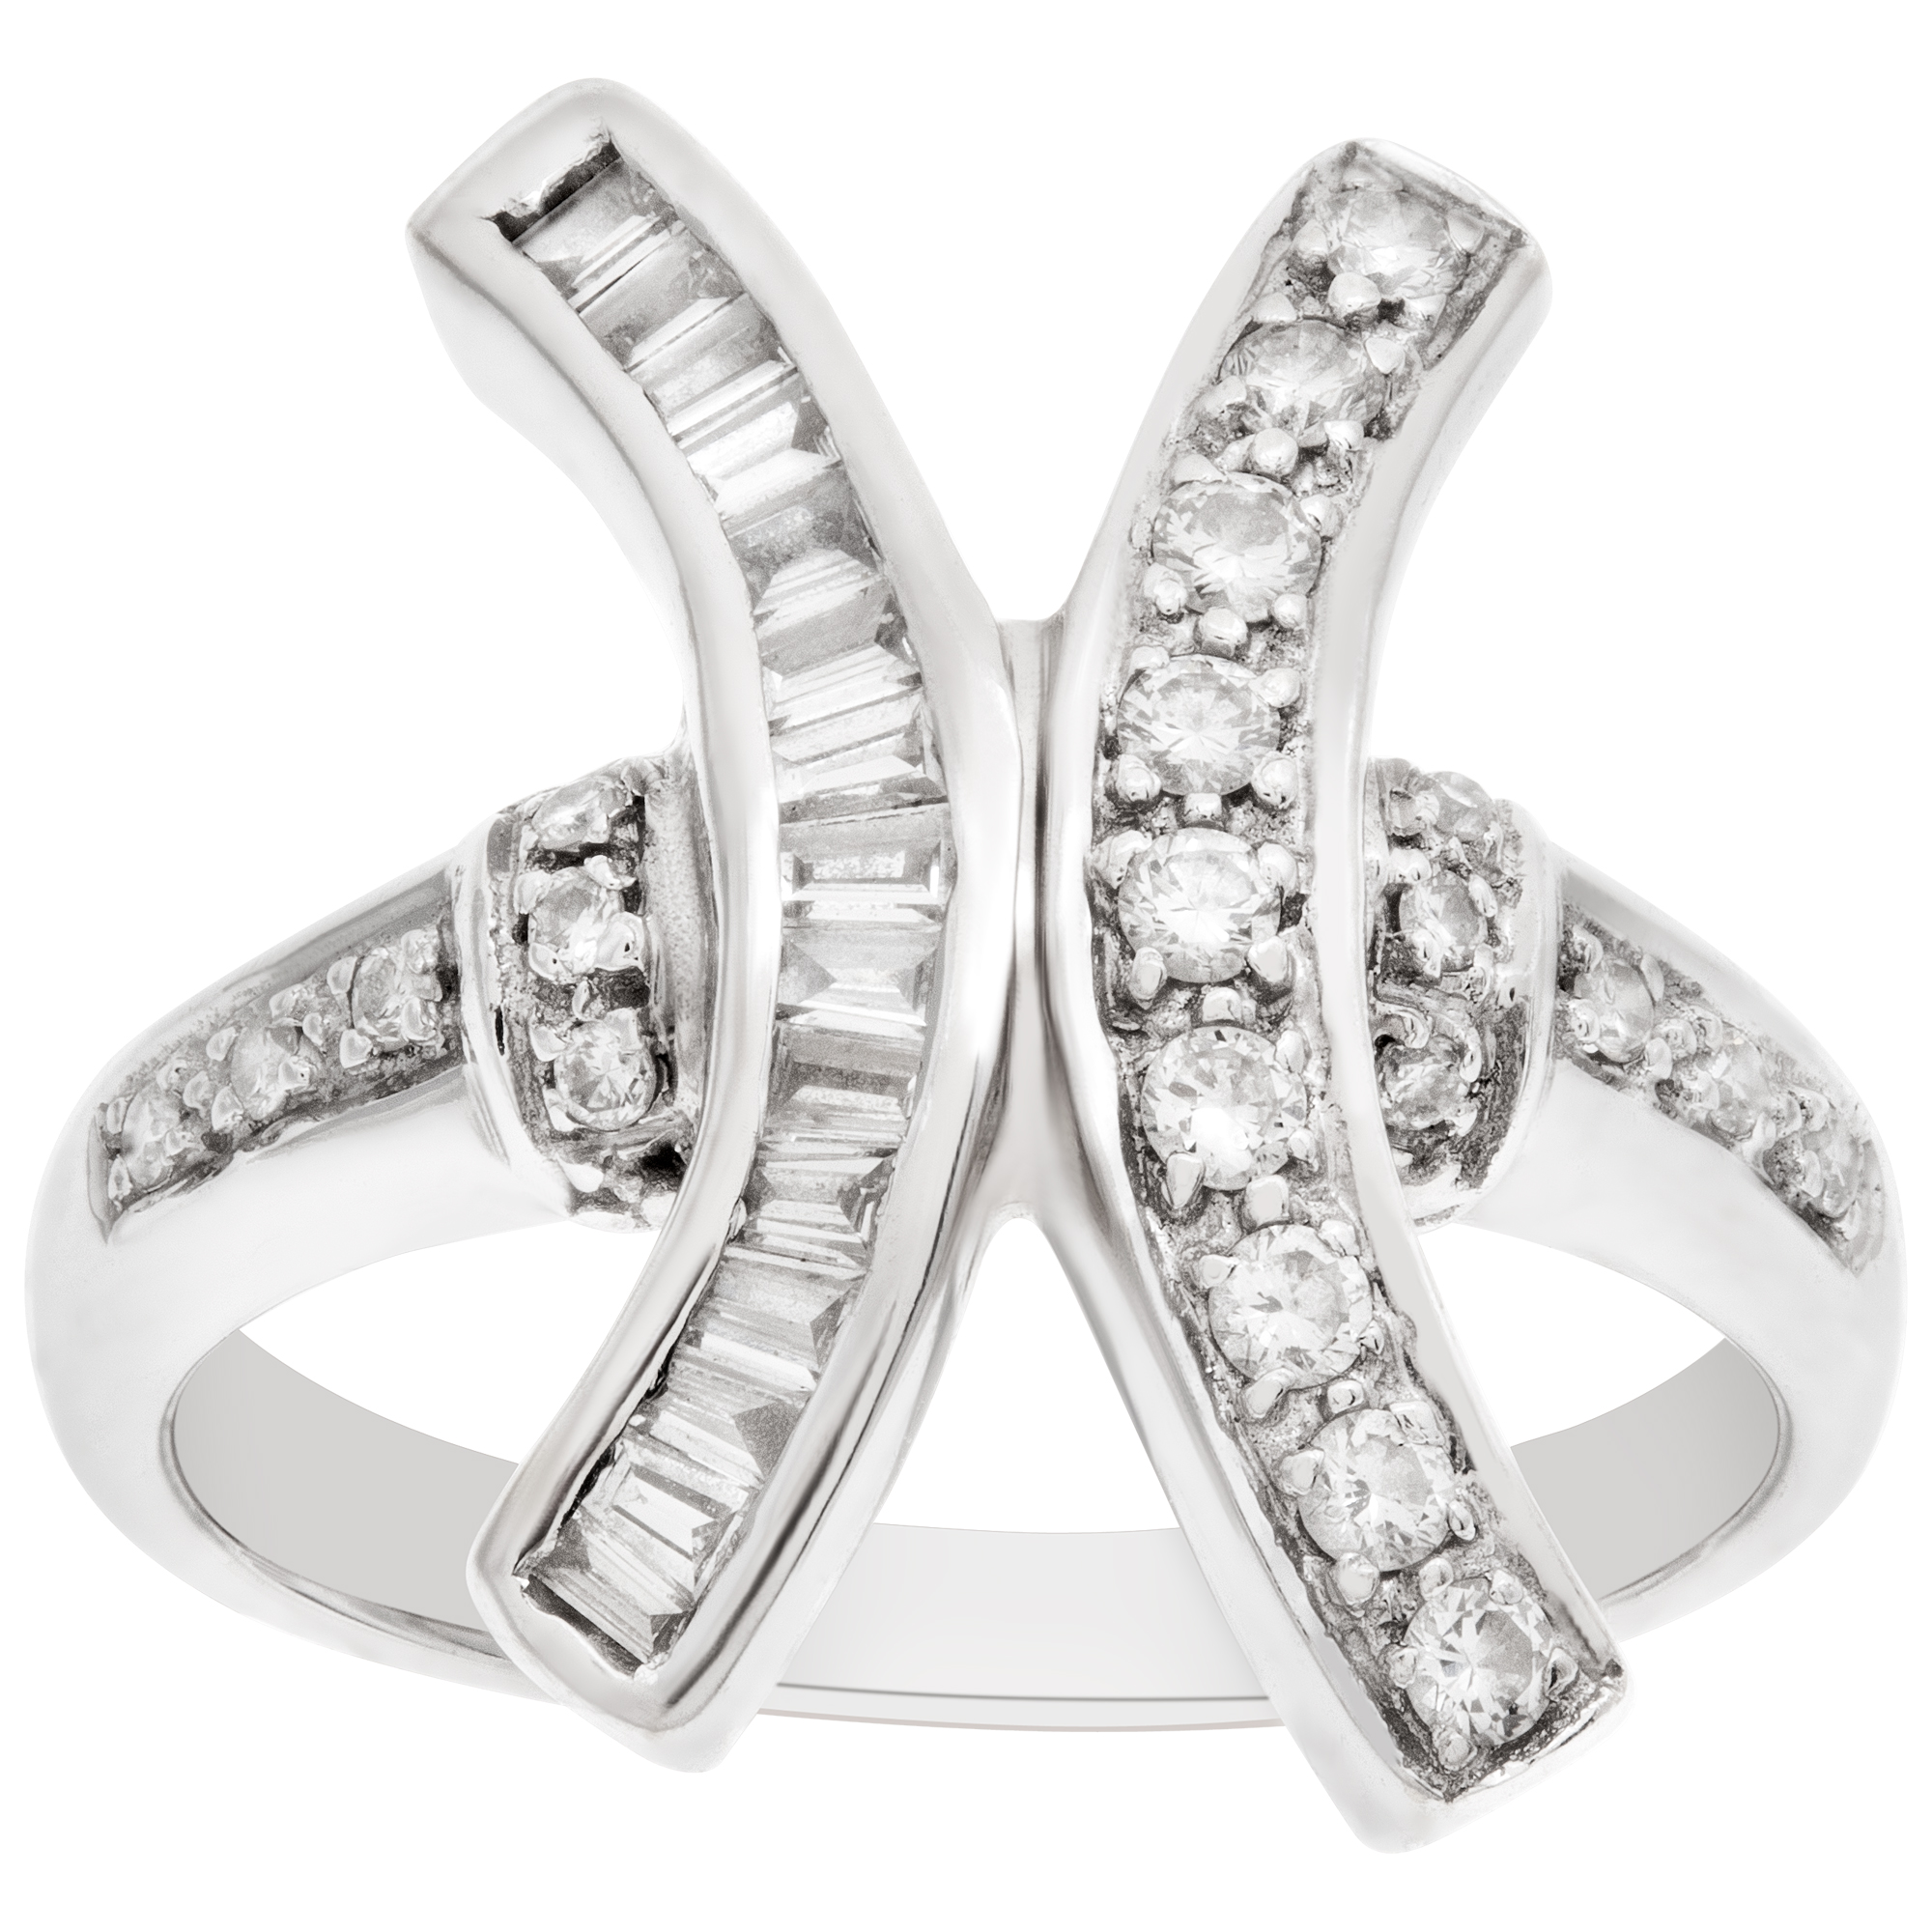 "X" shaped diamond ring in 18k white gold. 0.30 carats in diamonds. size 6